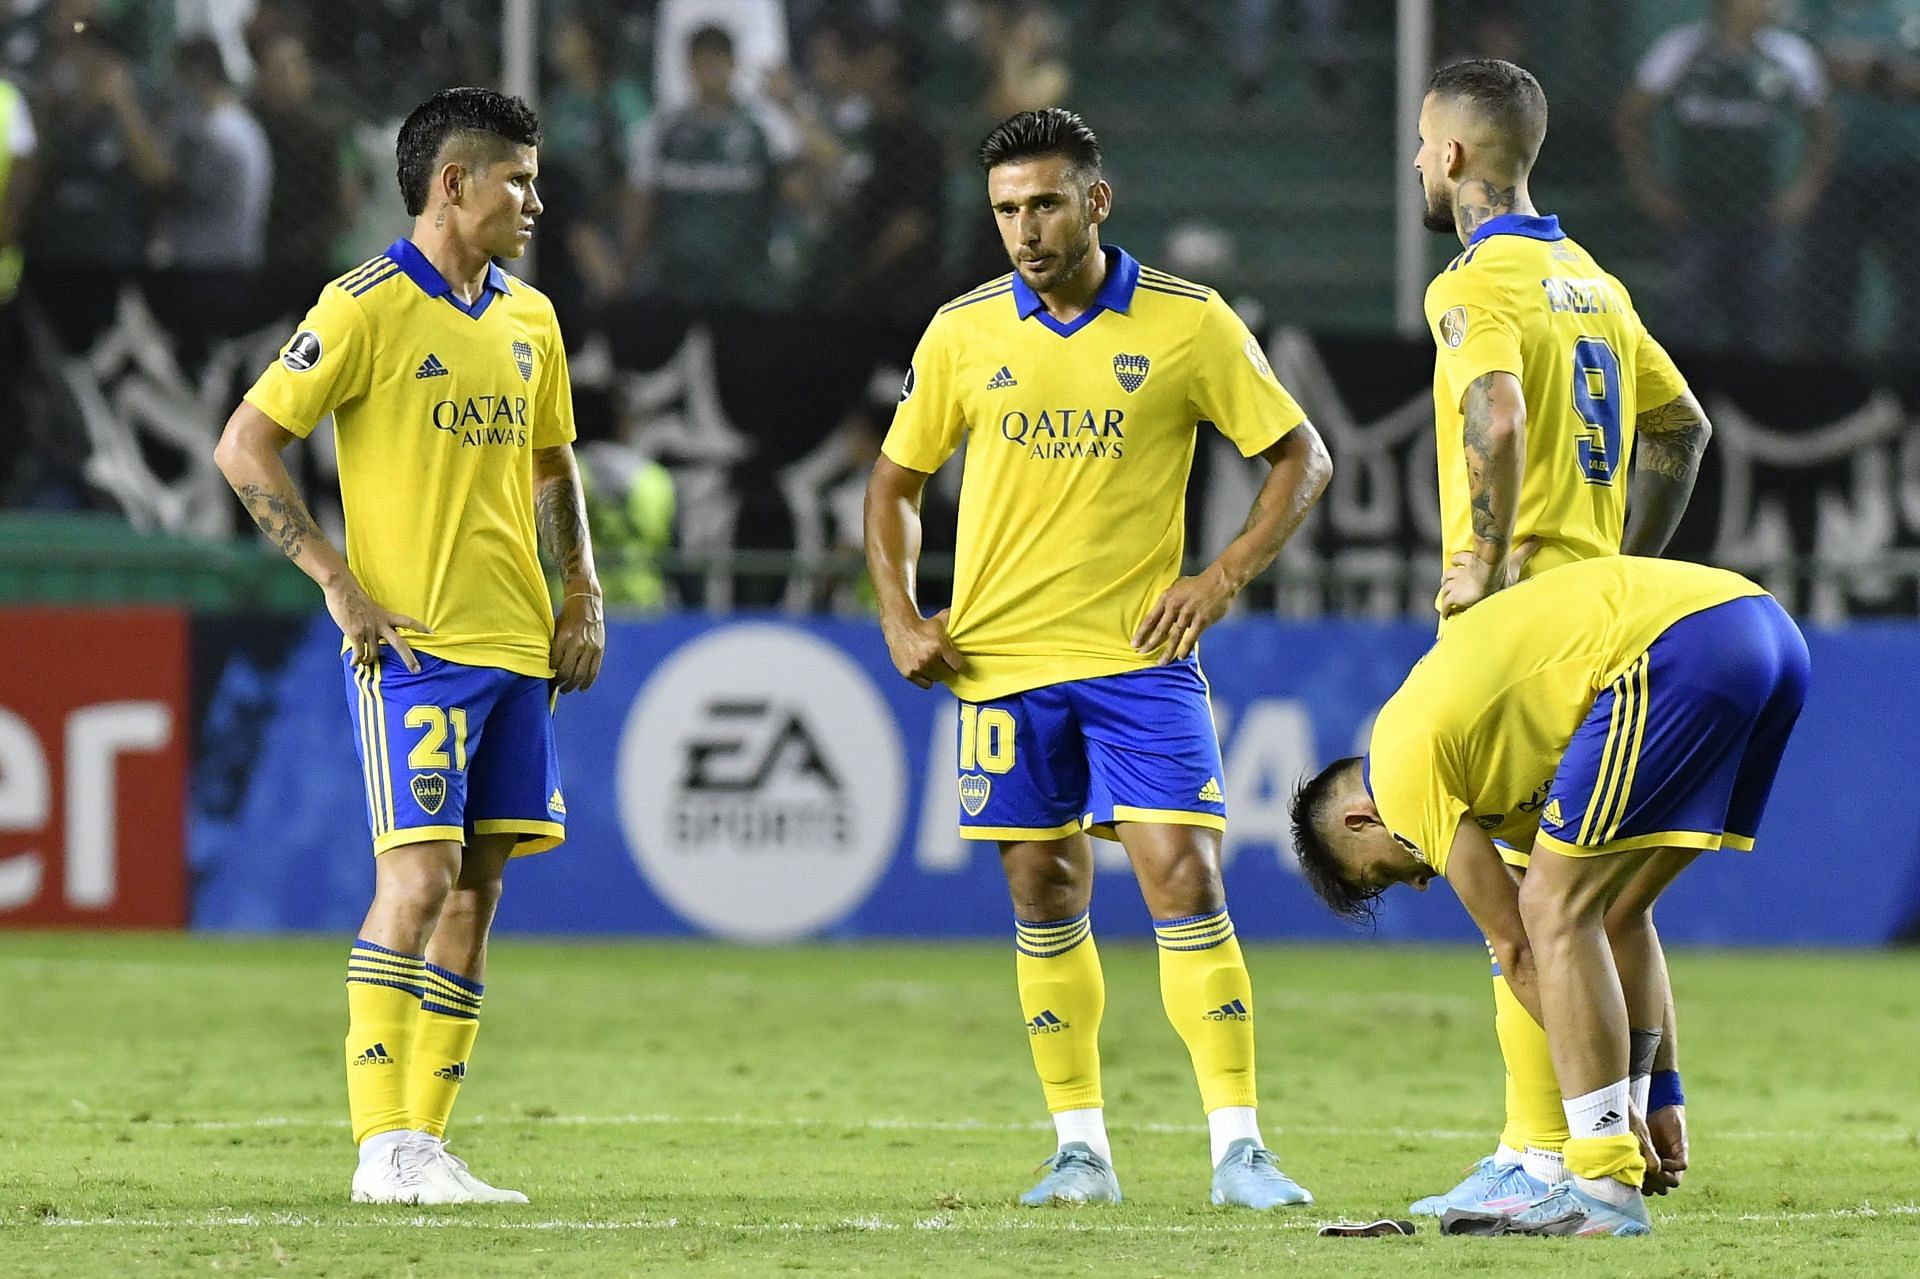 Boca Juniors host Always Ready in their upcoming Copa Libertadores fixture on Tuesday